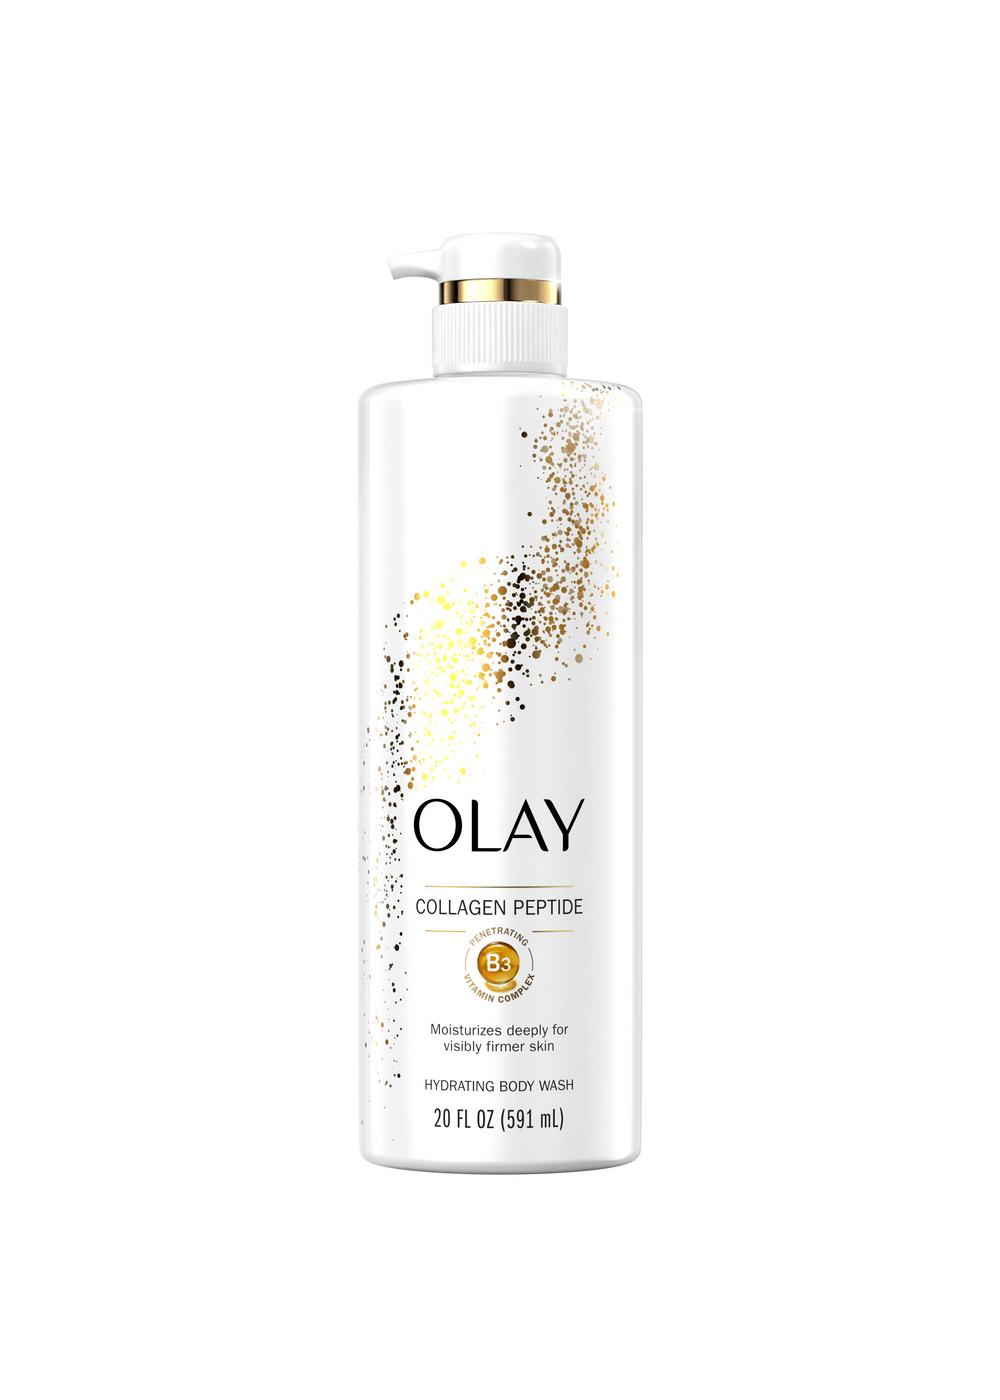 Olay Collagen Peptide Hydrating Body Wash; image 1 of 2